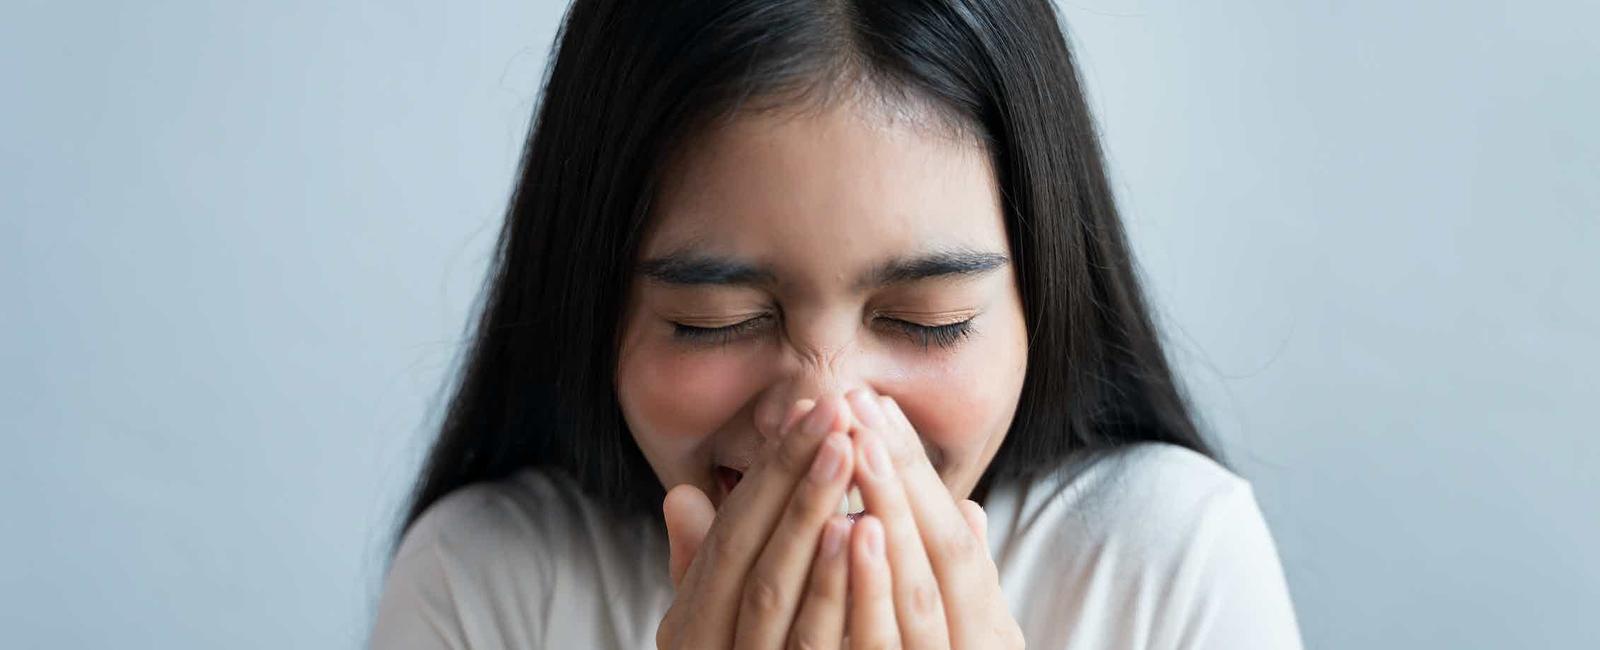 About a quarter of the population sneeze when they are exposed to bright light